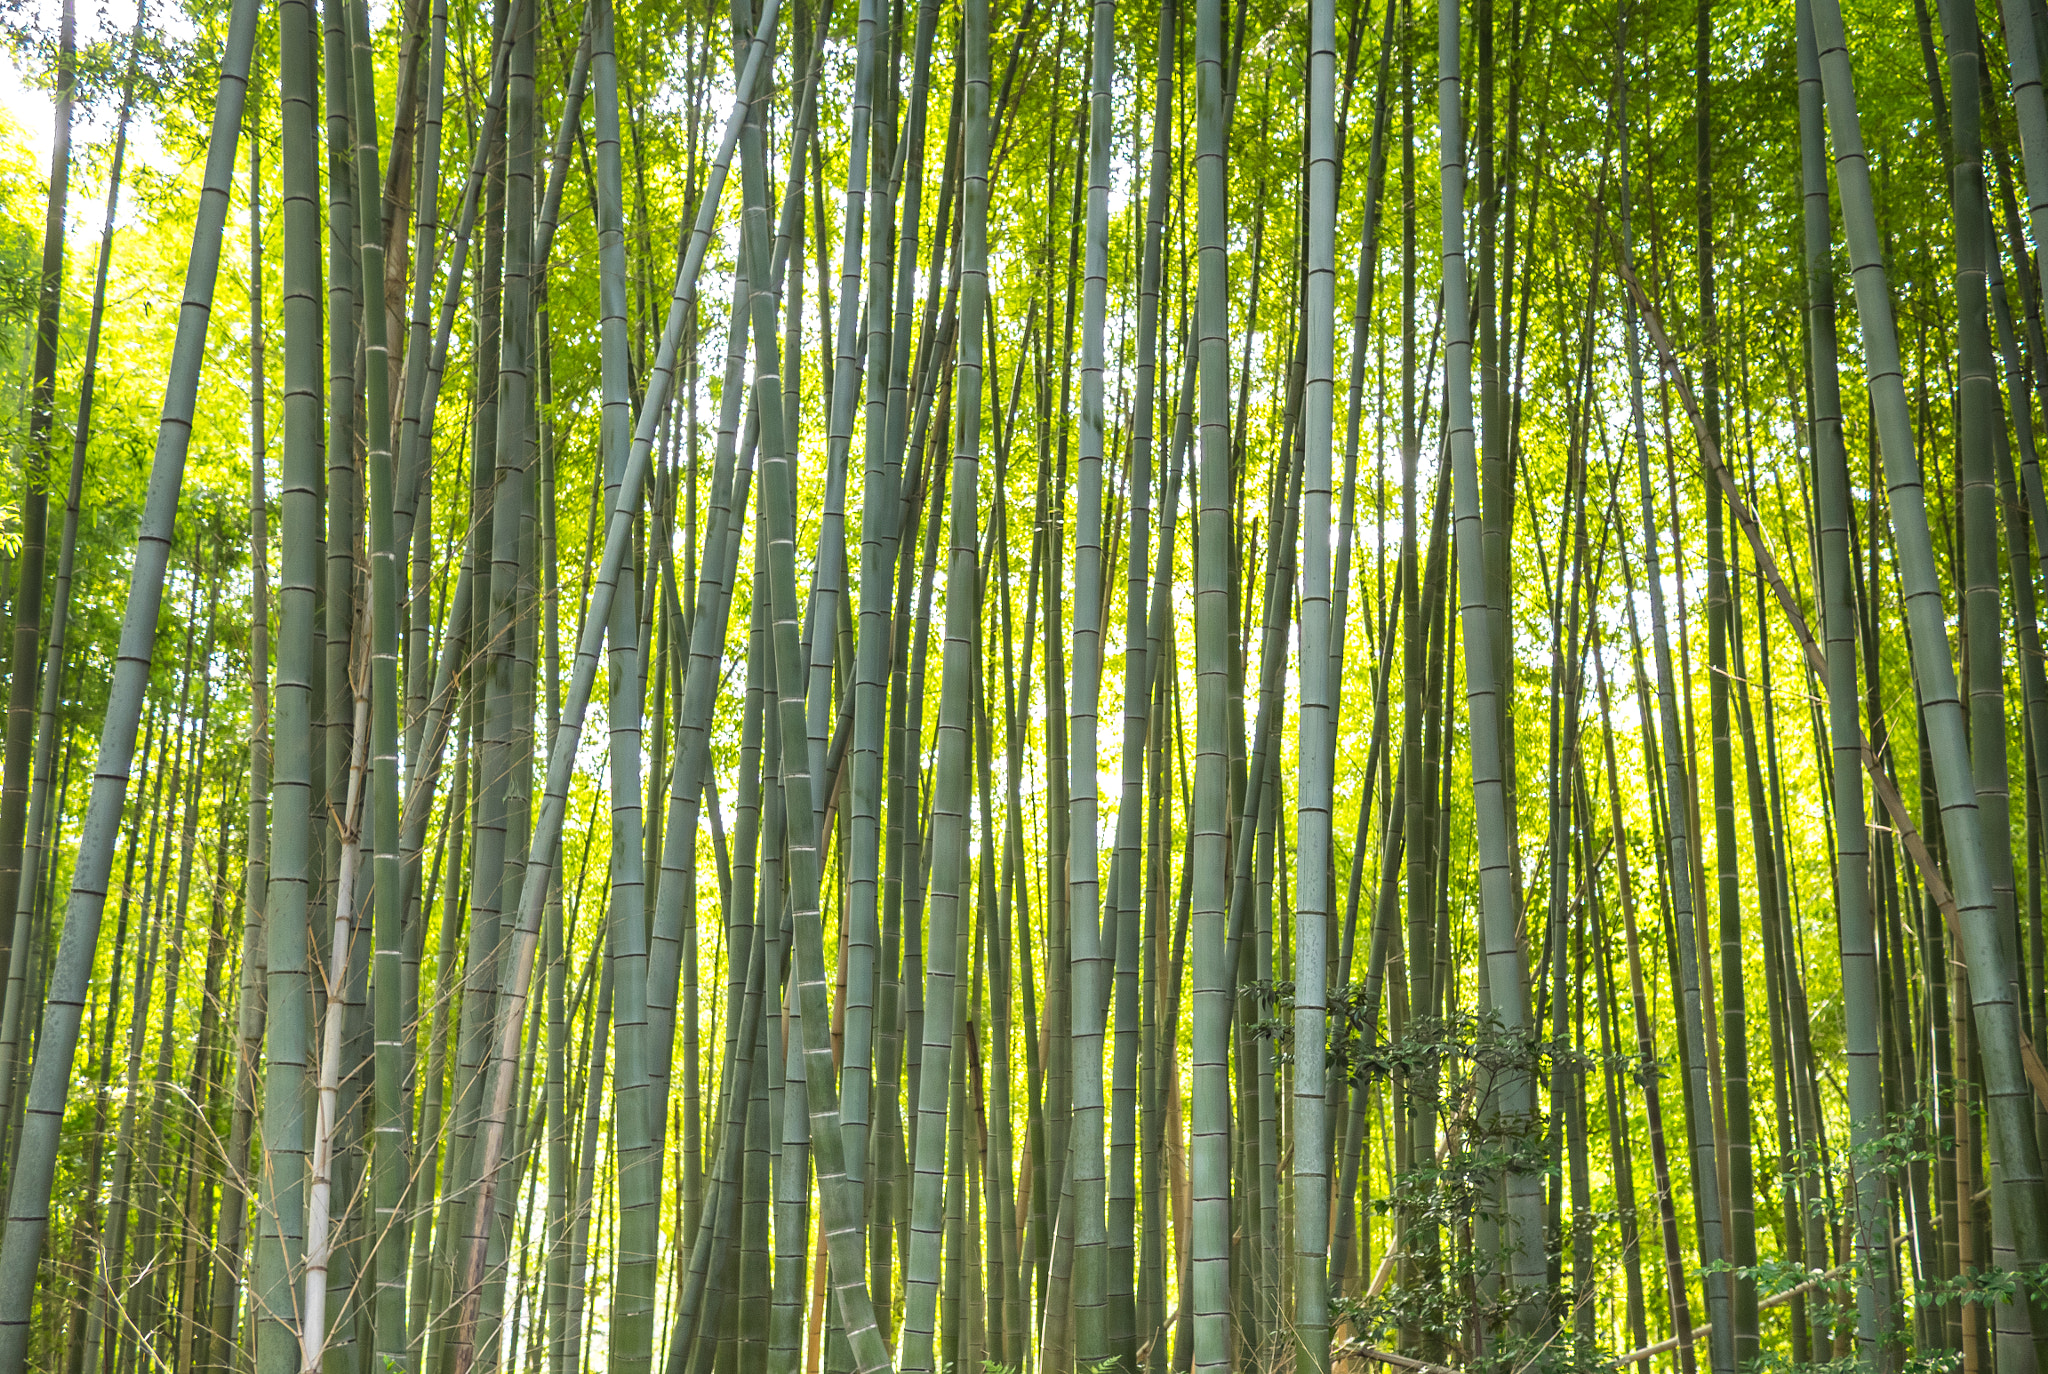 Olympus OM-D E-M1 + Panasonic Lumix G 20mm F1.7 ASPH sample photo. The bamboo forest photography